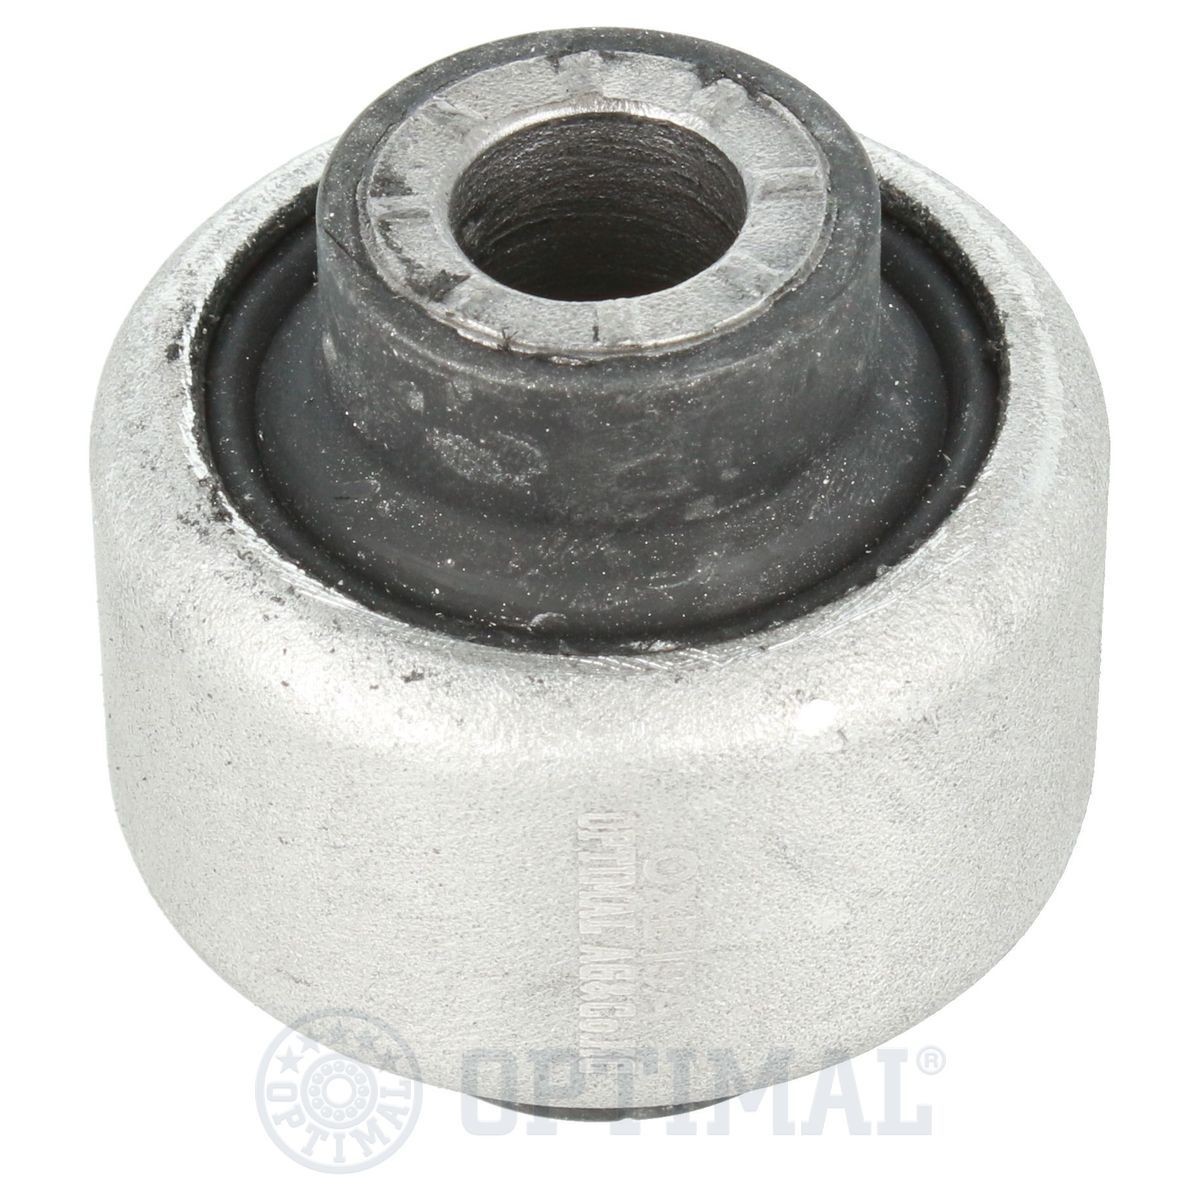 F8-8382 OPTIMAL Suspension bushes TOYOTA Lower, Front, Front Axle, both sides, 33,5mm, Rubber-Metal Mount, for control arm